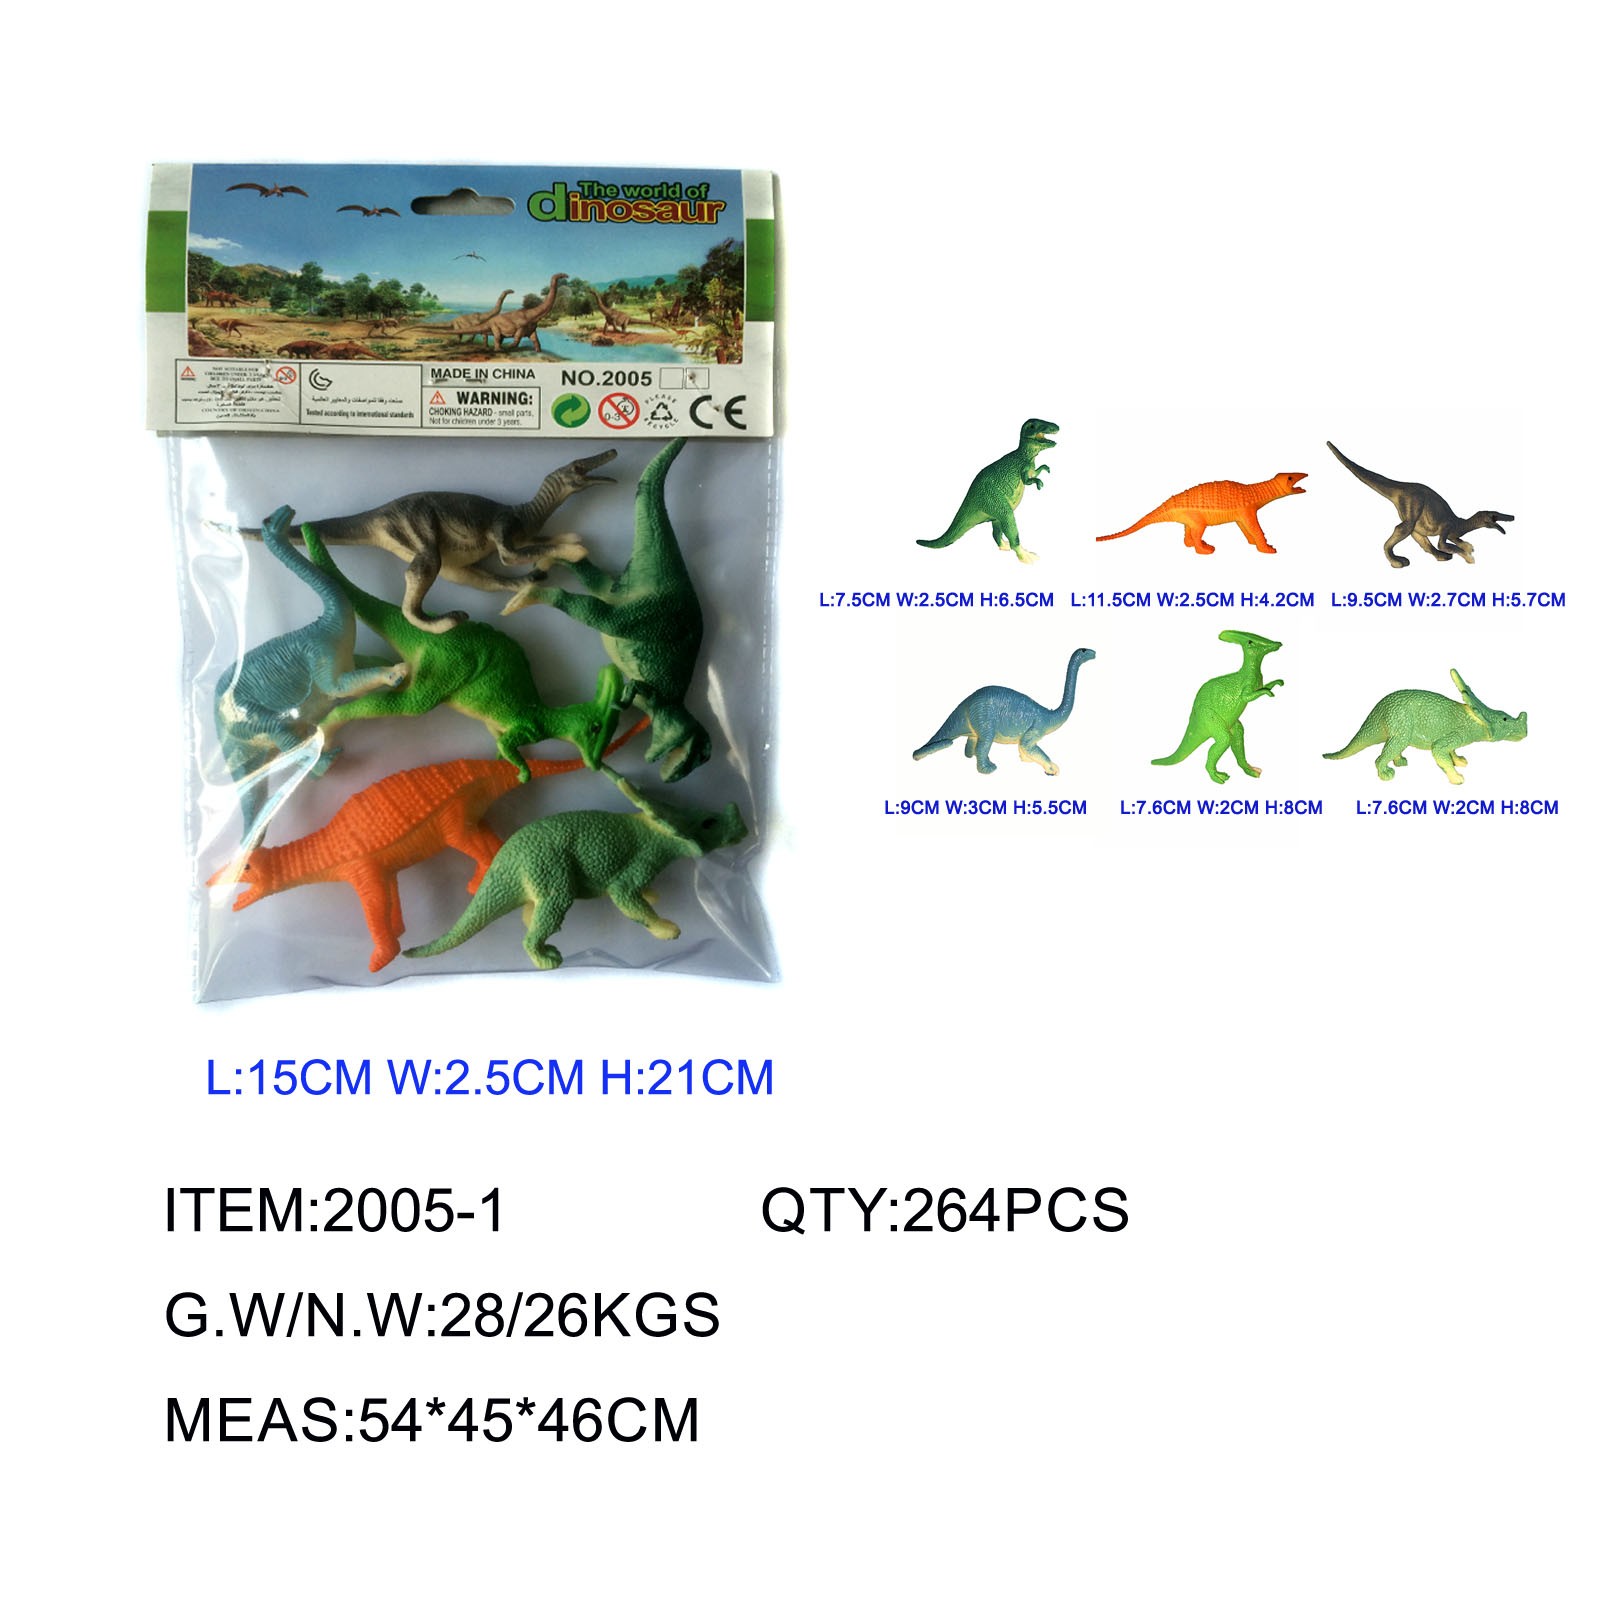 2005-1Hot sale other gift hollow model plastic mini soft simulation toy